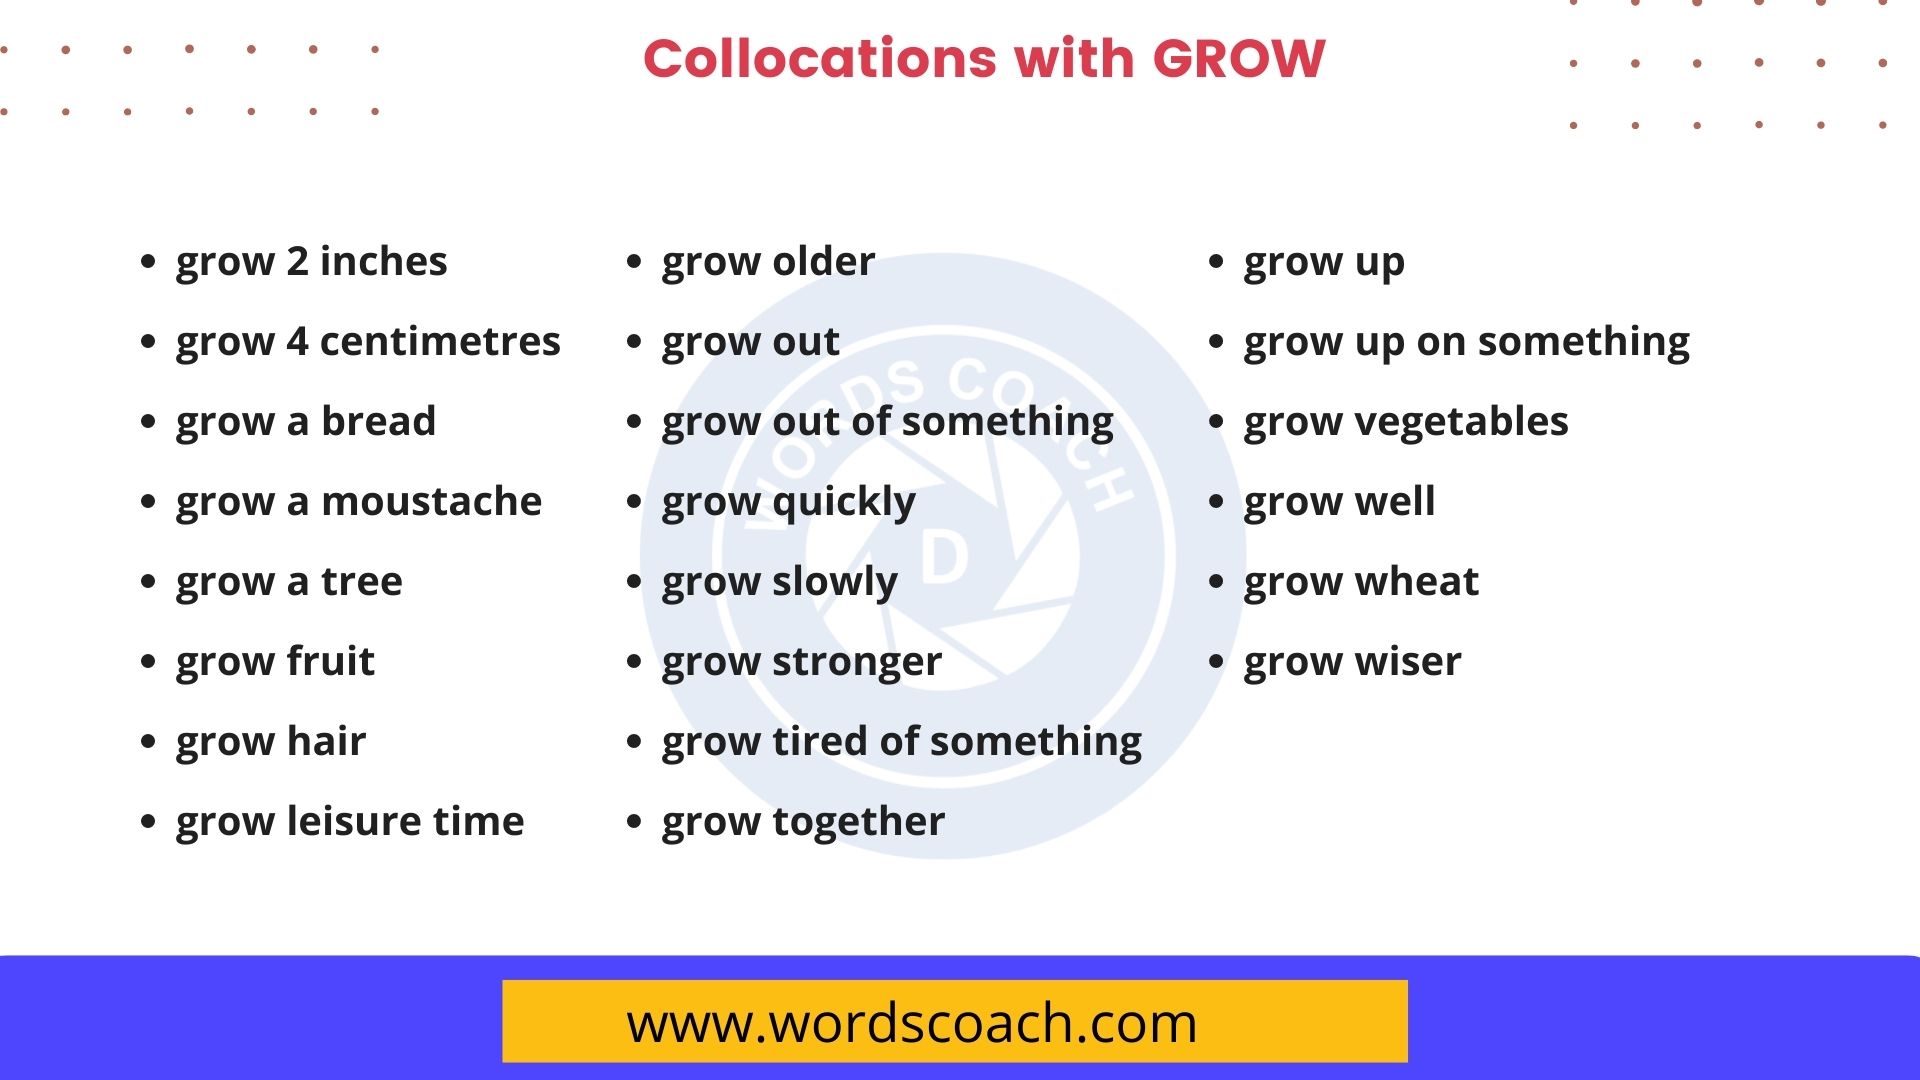 Collocations with GROW - wordscoach.com